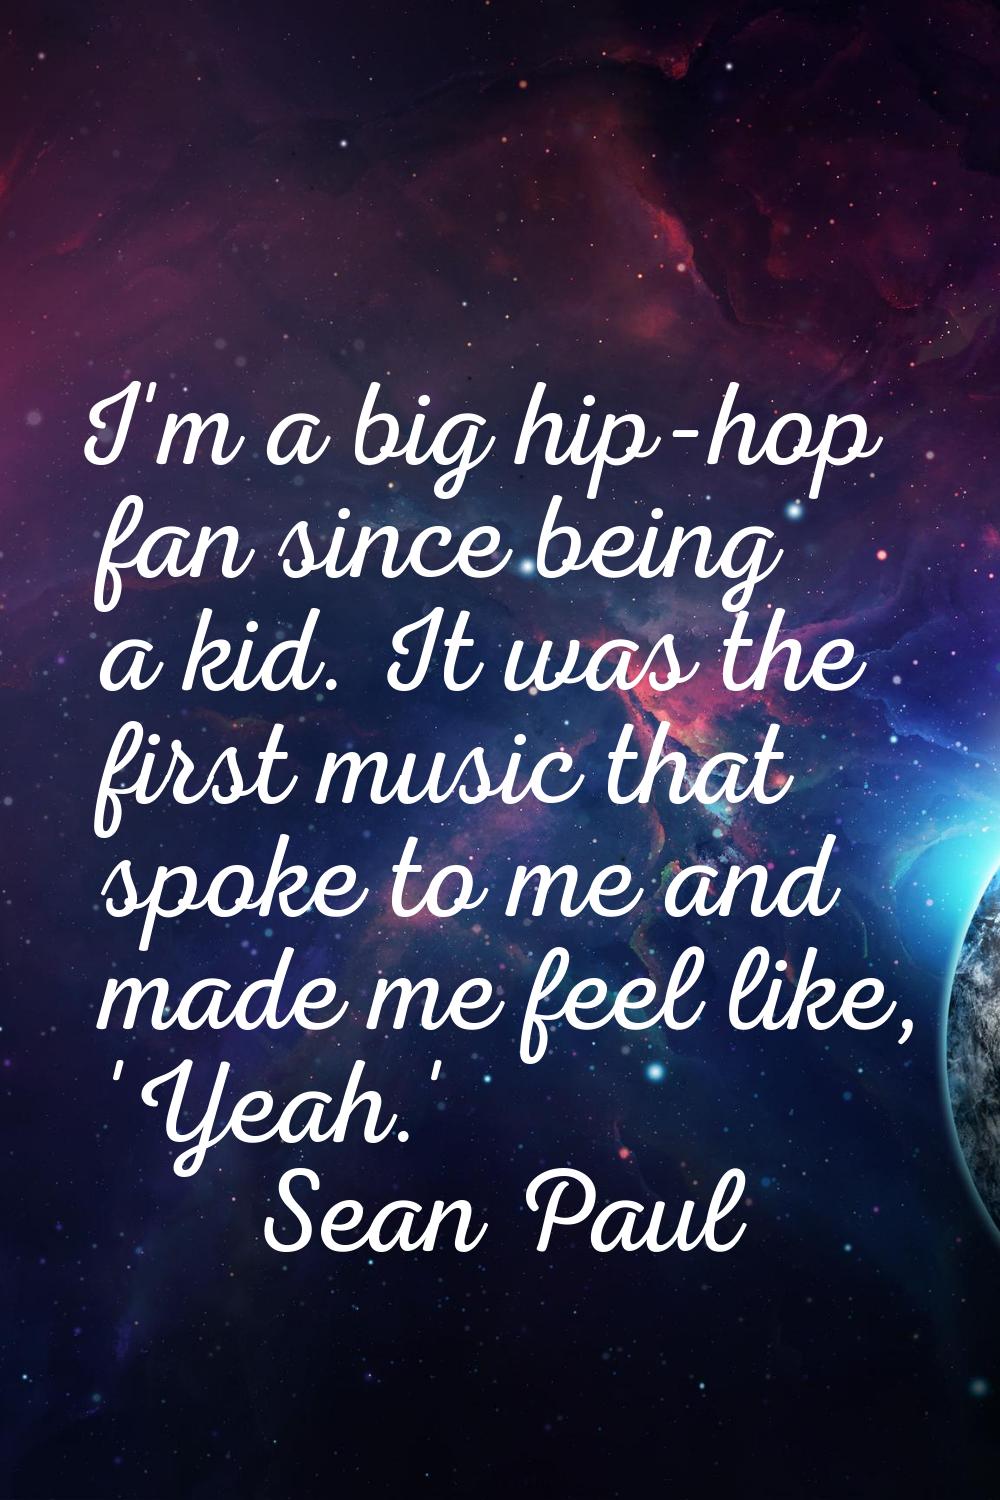 I'm a big hip-hop fan since being a kid. It was the first music that spoke to me and made me feel l